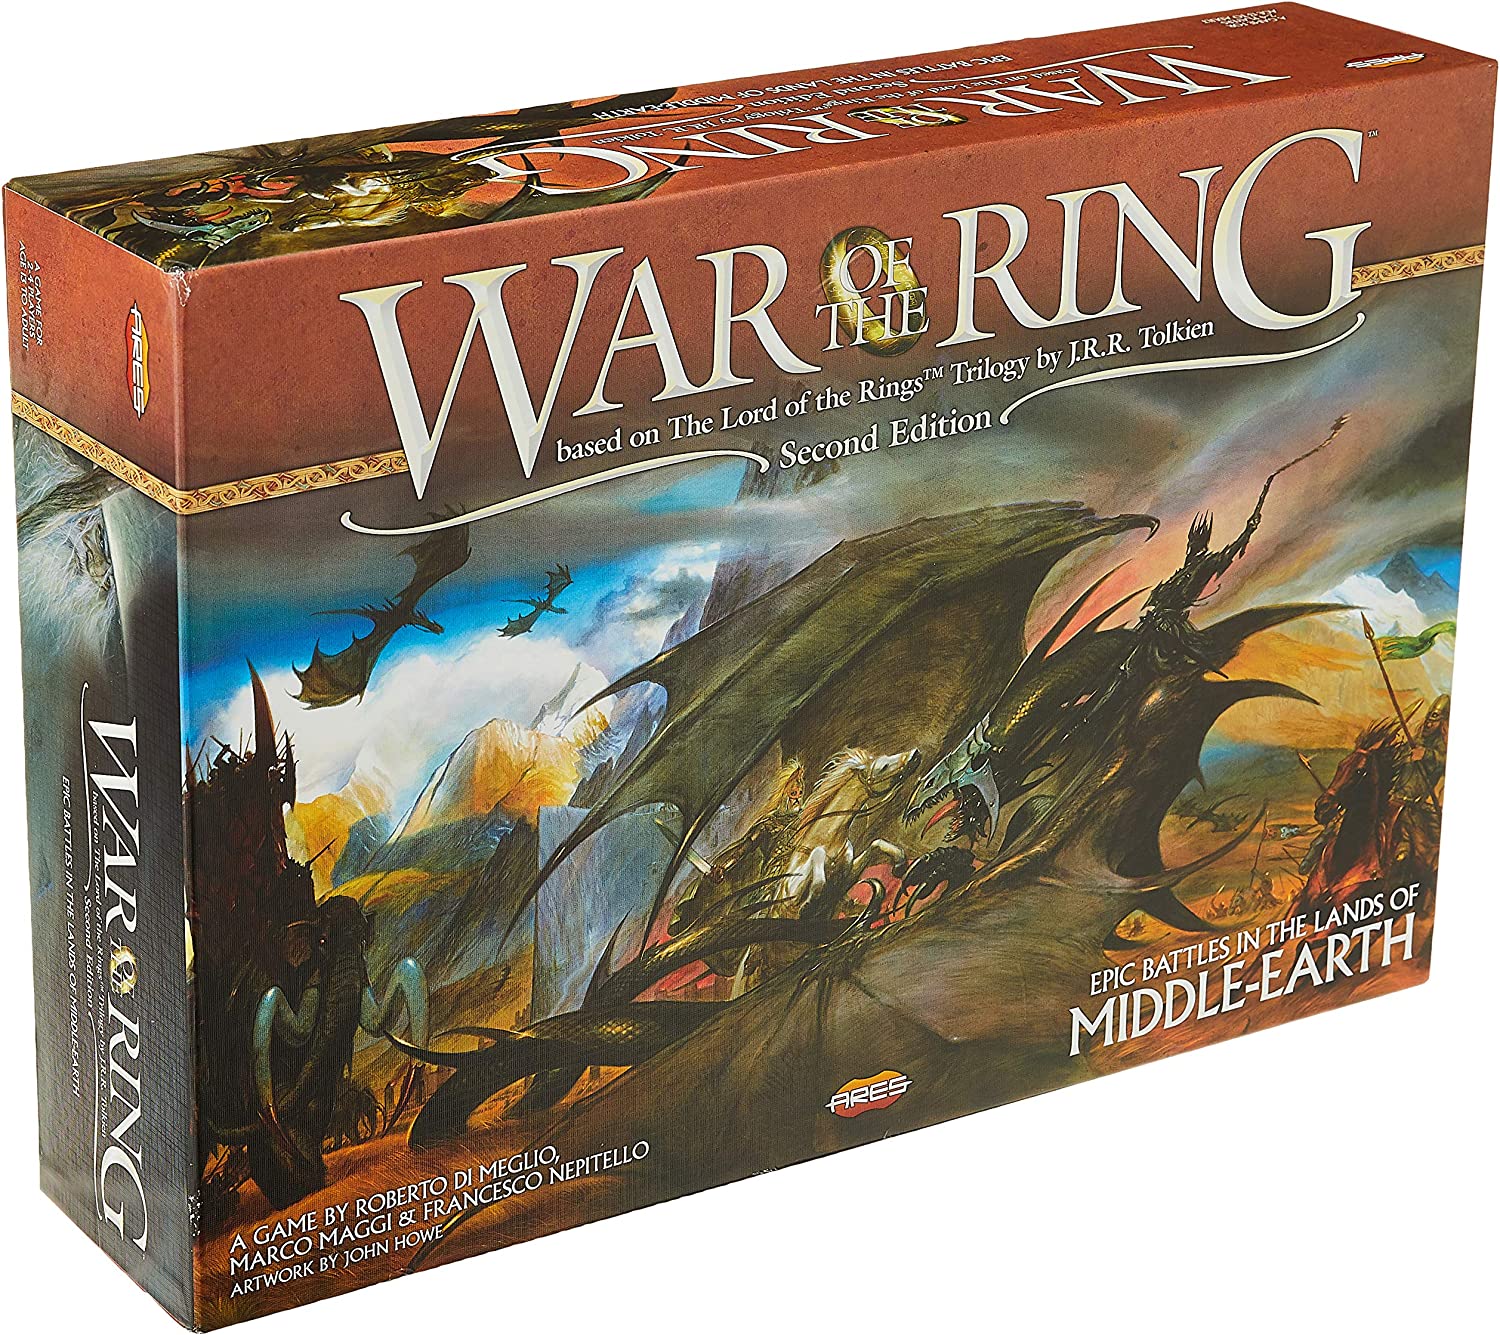 Board game types - War of the Ring box